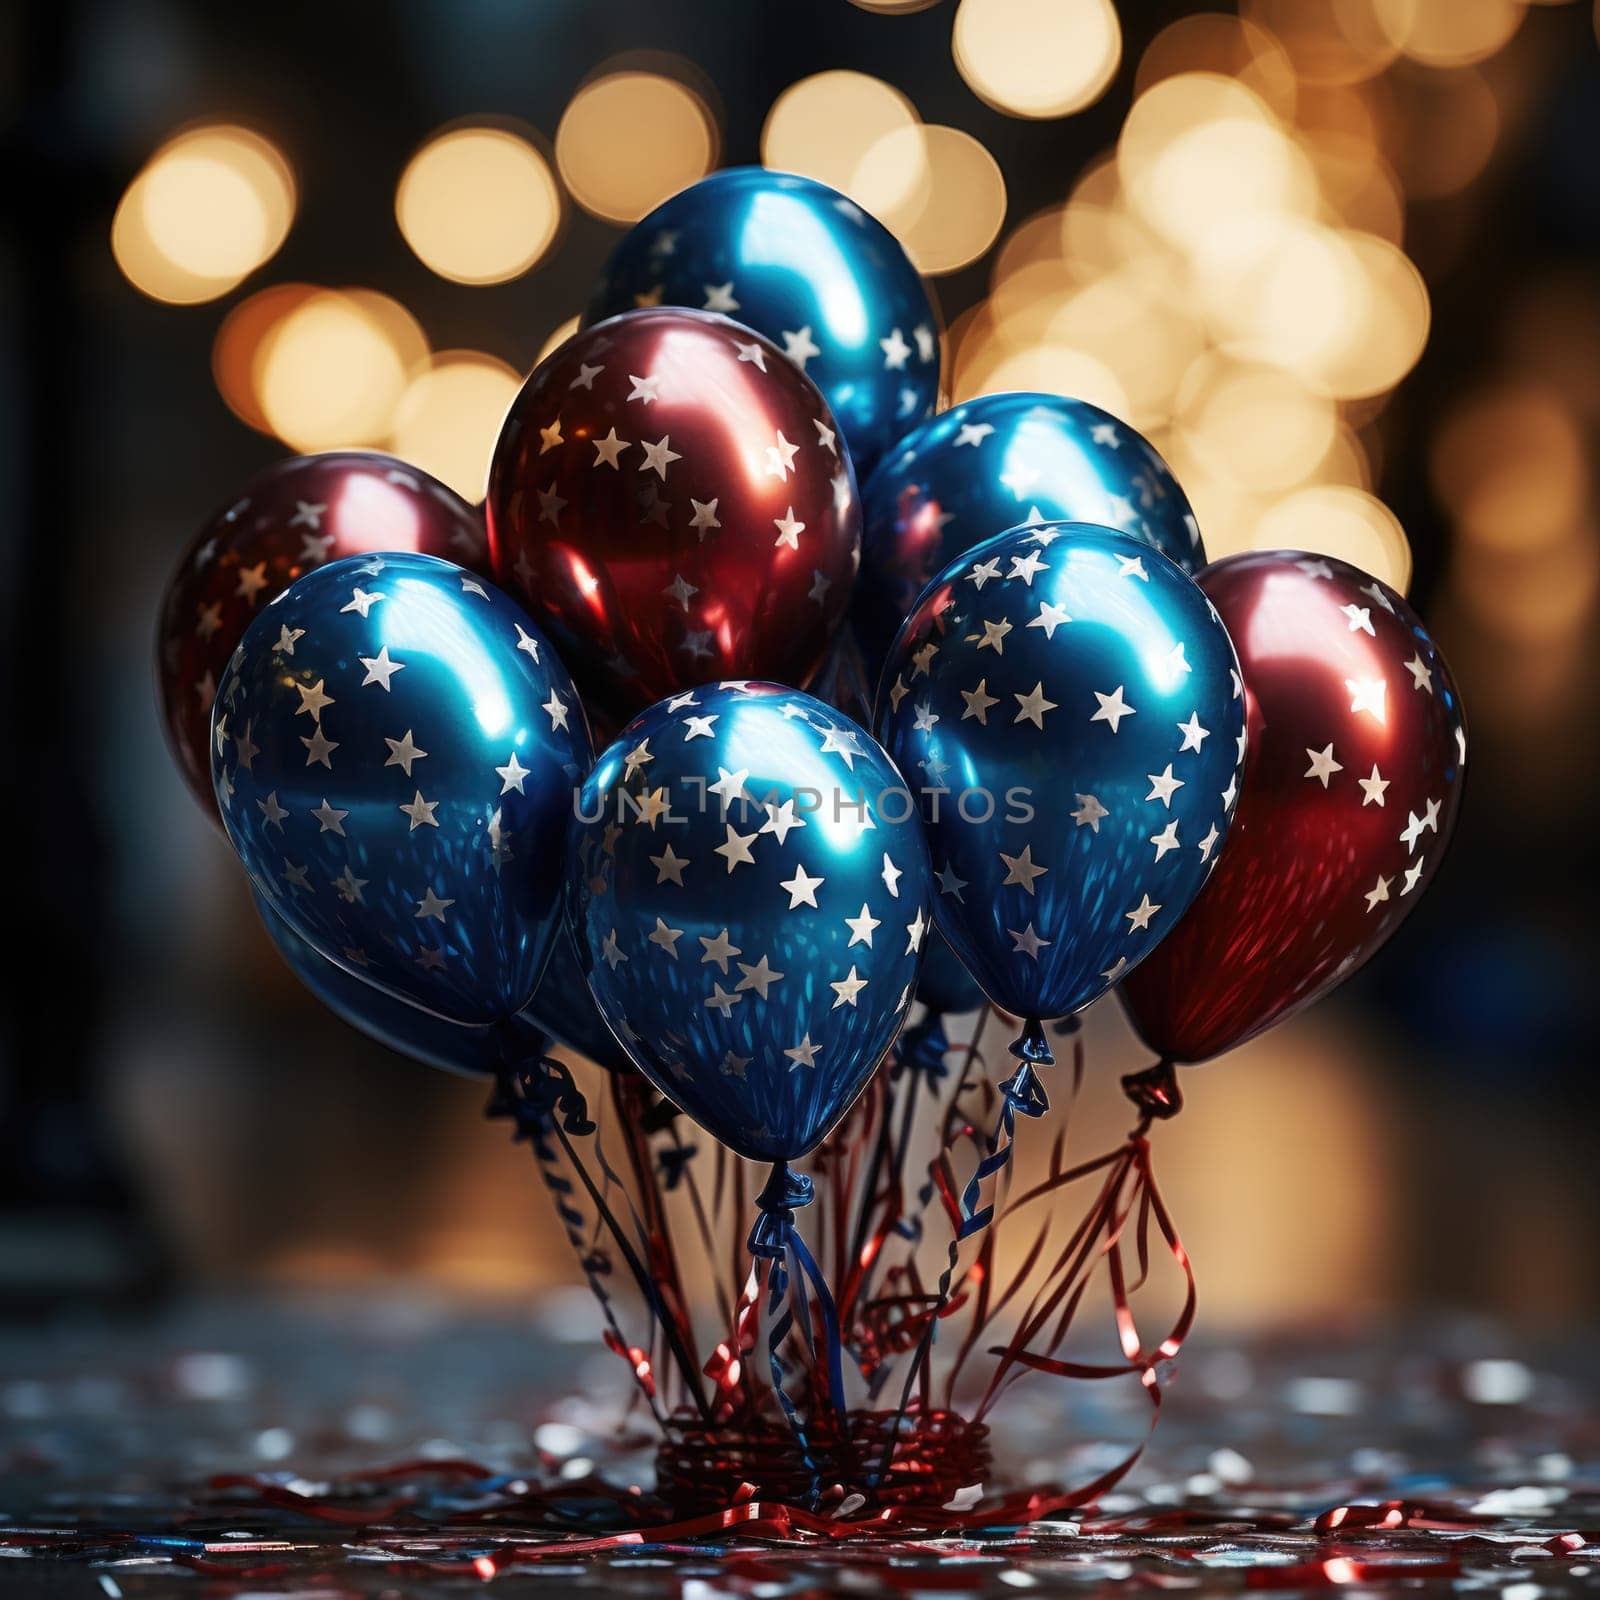 A collection of colorful balloons with patriotic designs arranged neatly on a table, creating a festive and cheerful atmosphere.